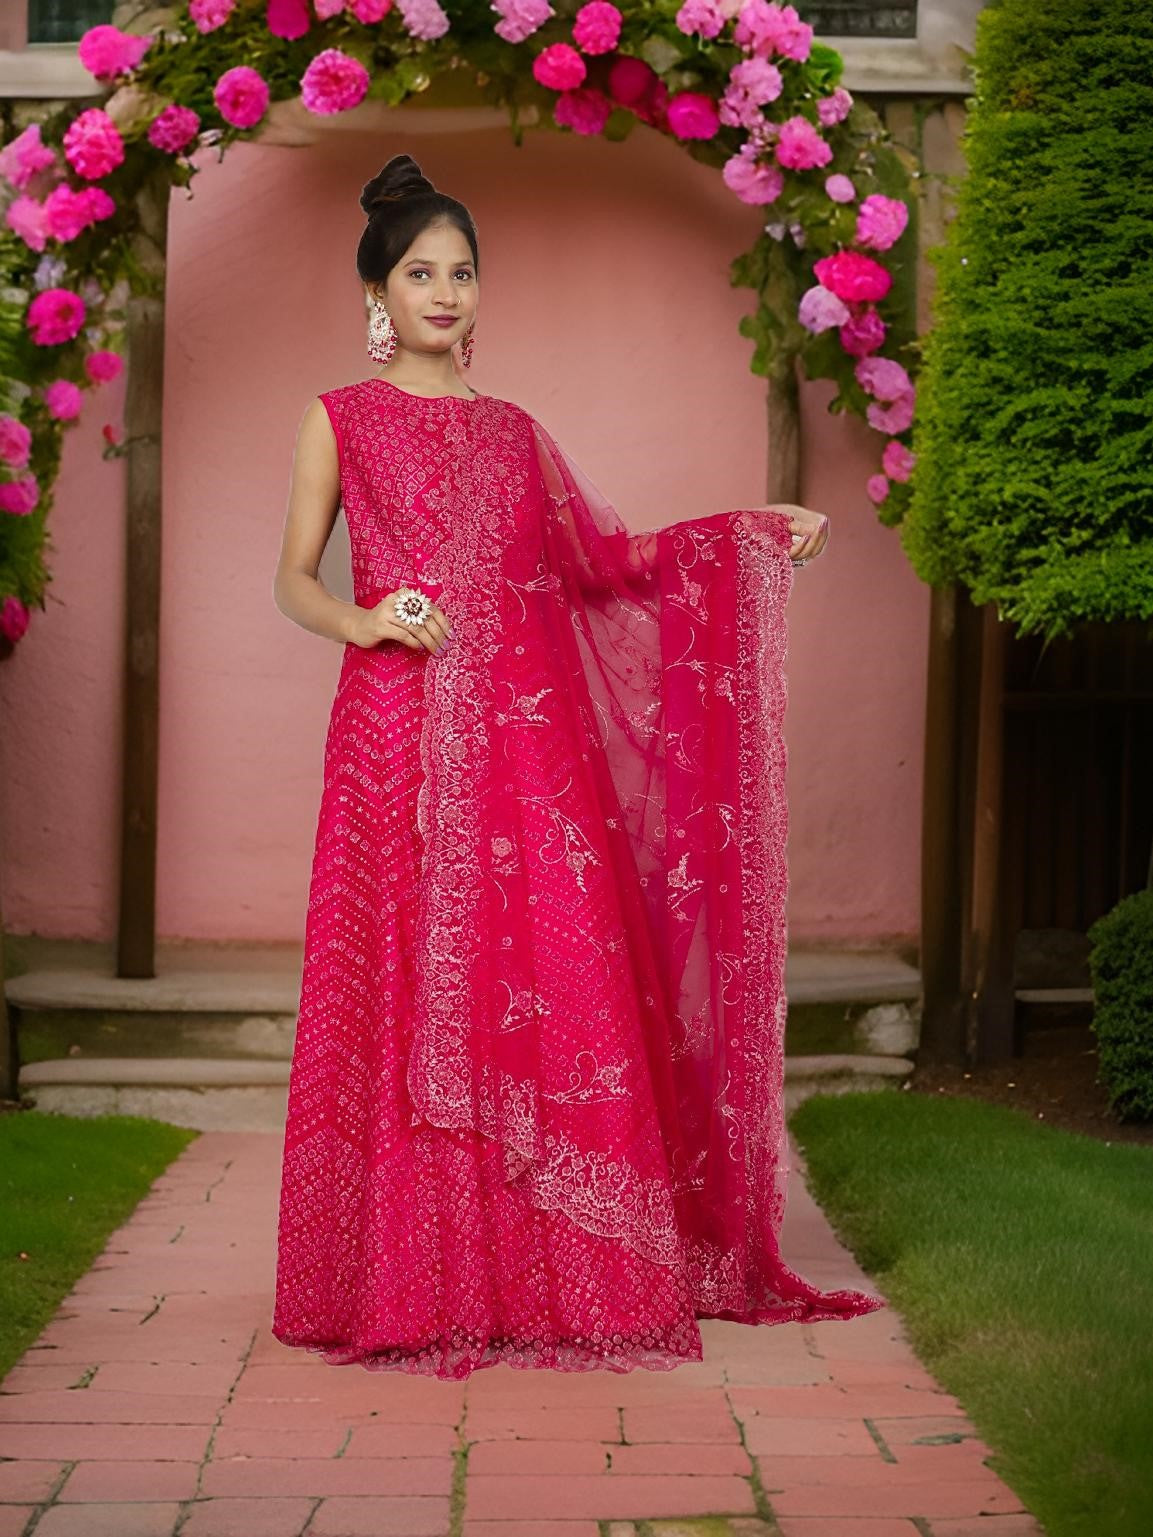 Gown with Glitter &amp; Shimmery effect for Women by Shreekama Magenta Designer Gowns for Party Festival Wedding Occasion in Noida